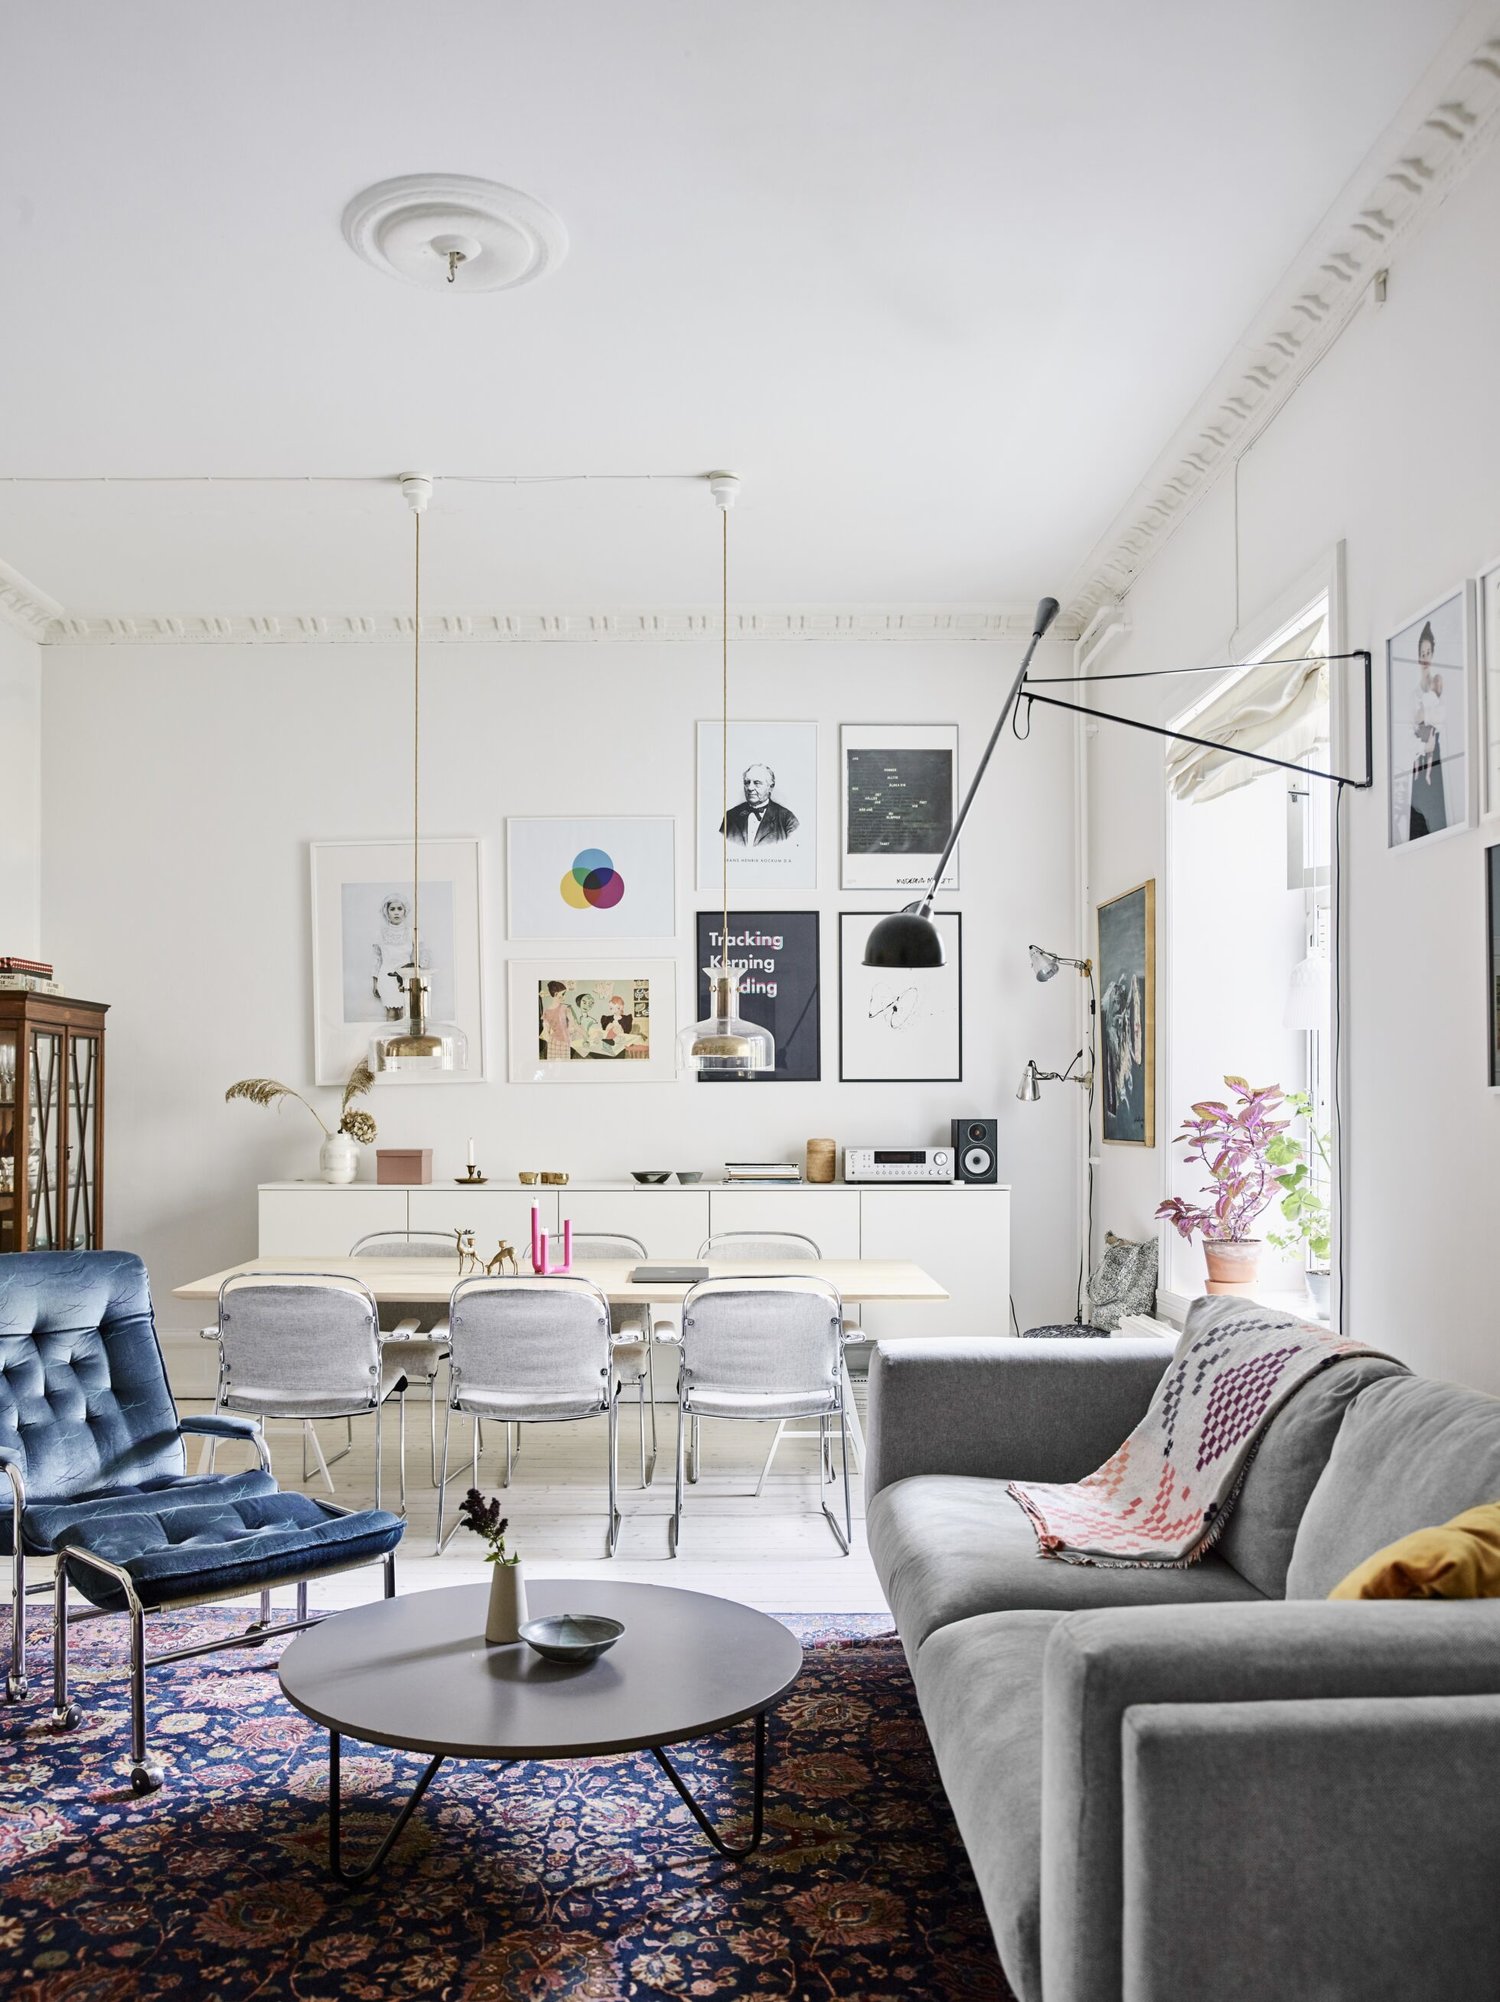 The Nordroom - A Bright And Creative Family Home in MalmÃ¶